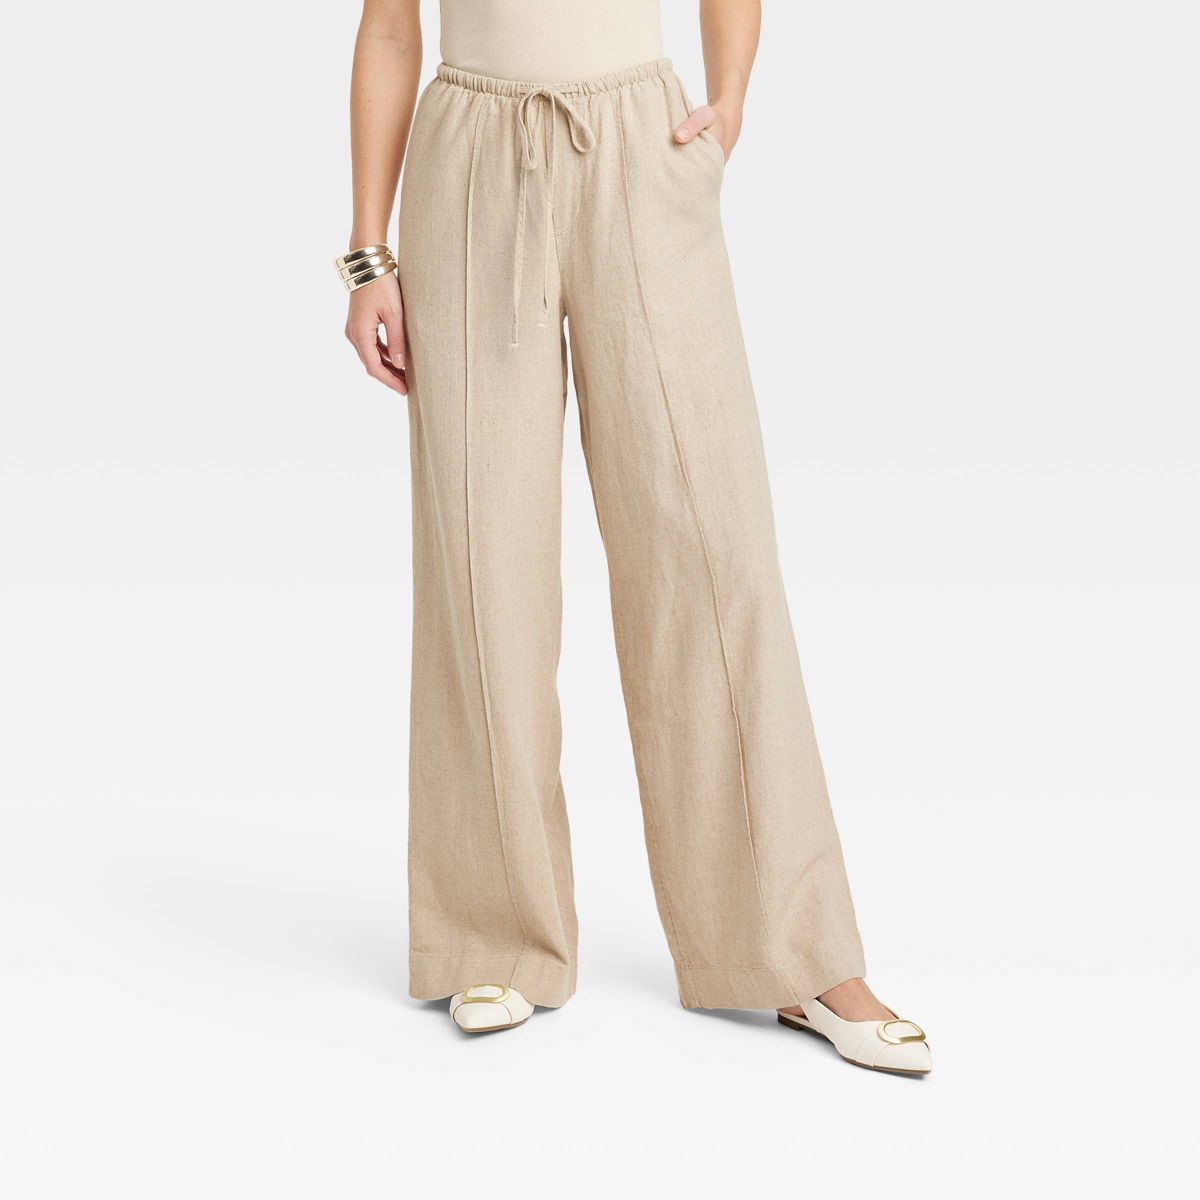 Women's High-Rise Wide Leg Linen Pull-On Pants - A New Day™ Tan M | Target